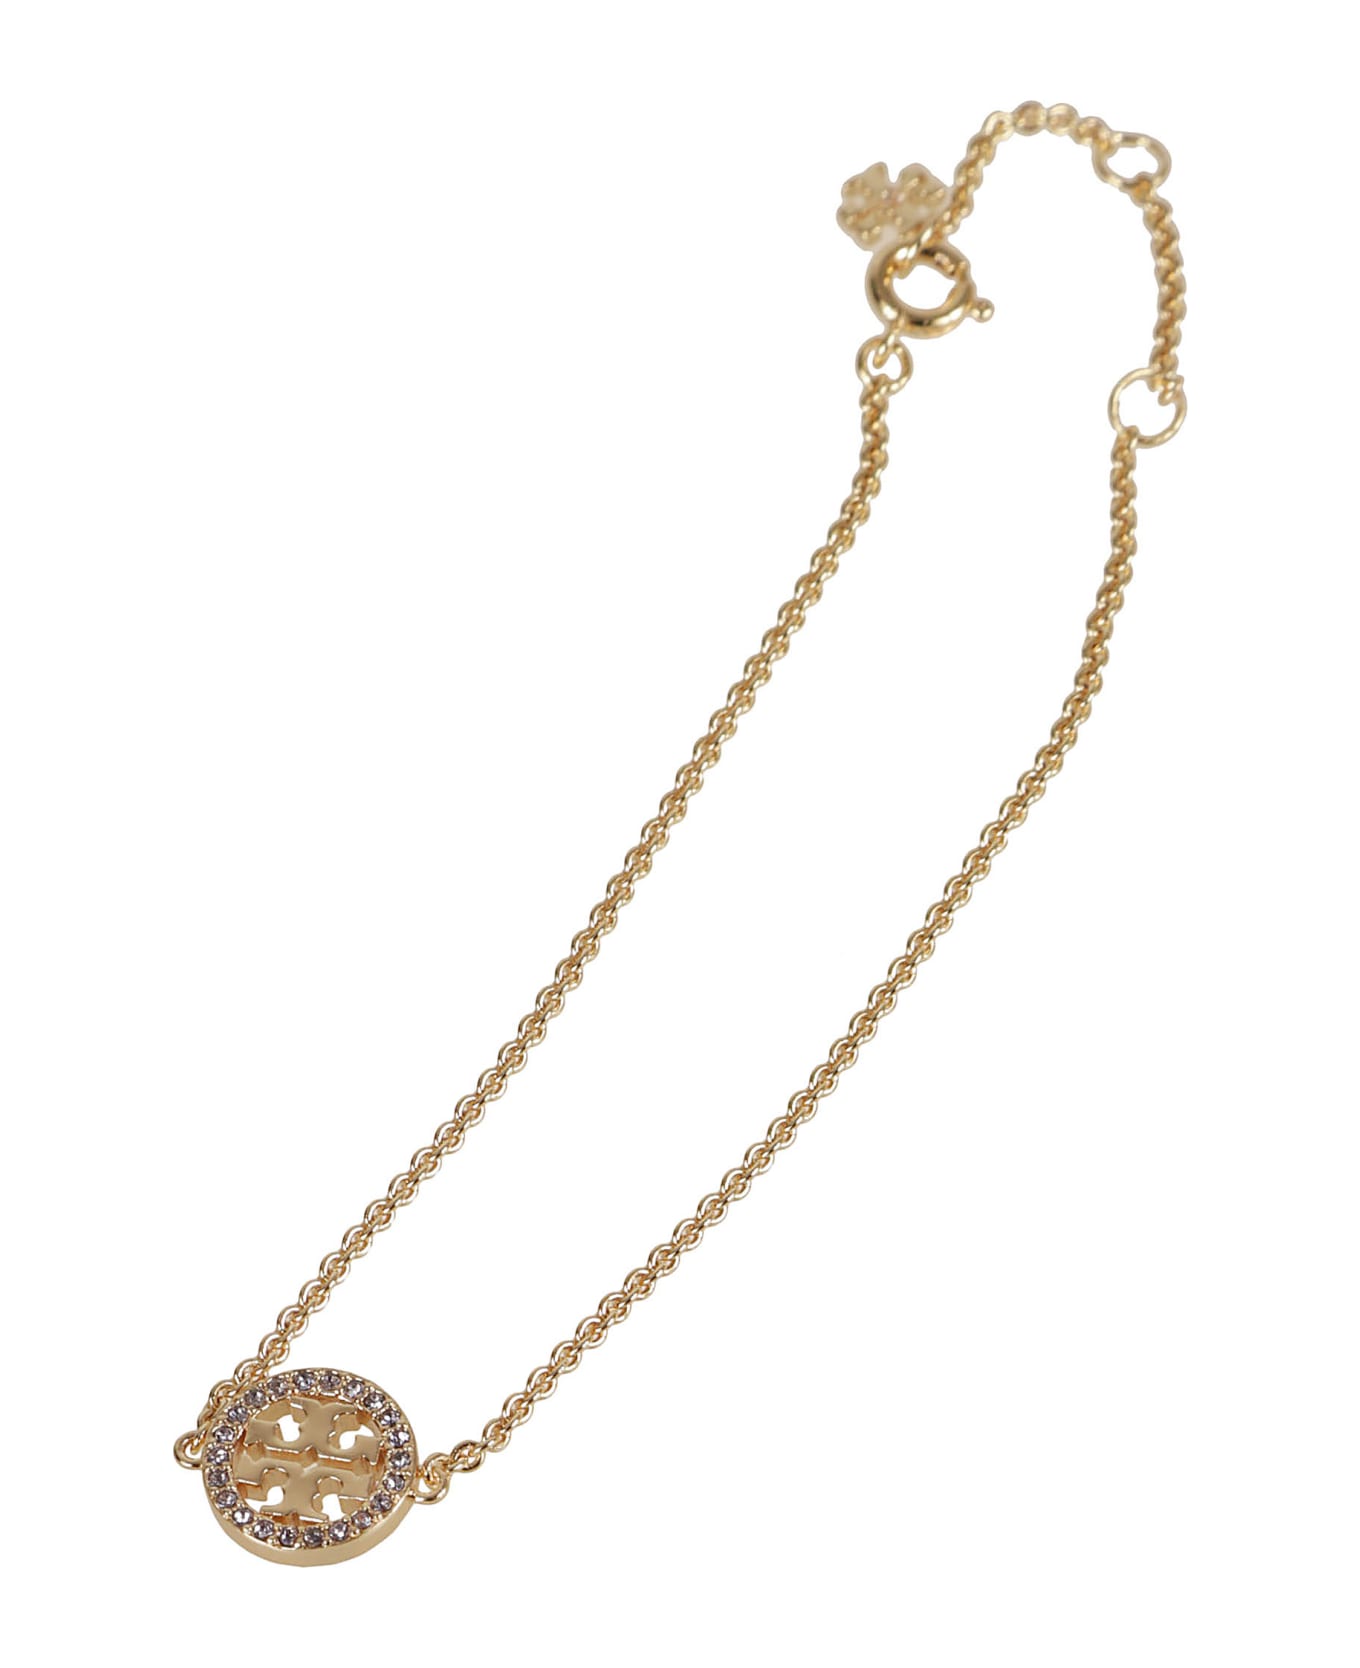 Tory Burch Miller Pave Pendant Necklace - Tory Gold/Purple ネックレス